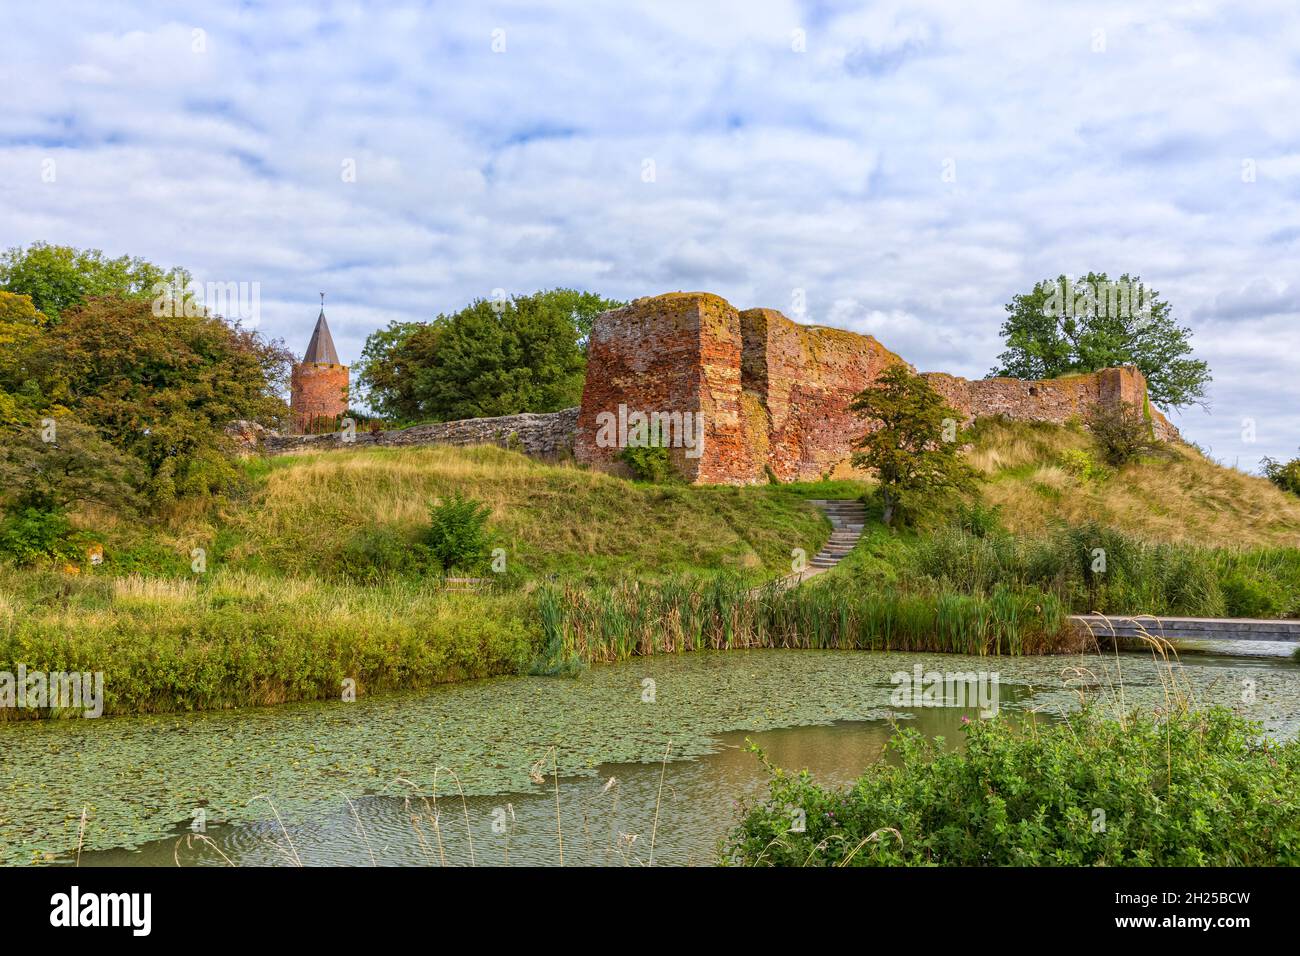 Vordingborg castle ruins with the Goose Tower in background Stock Photo